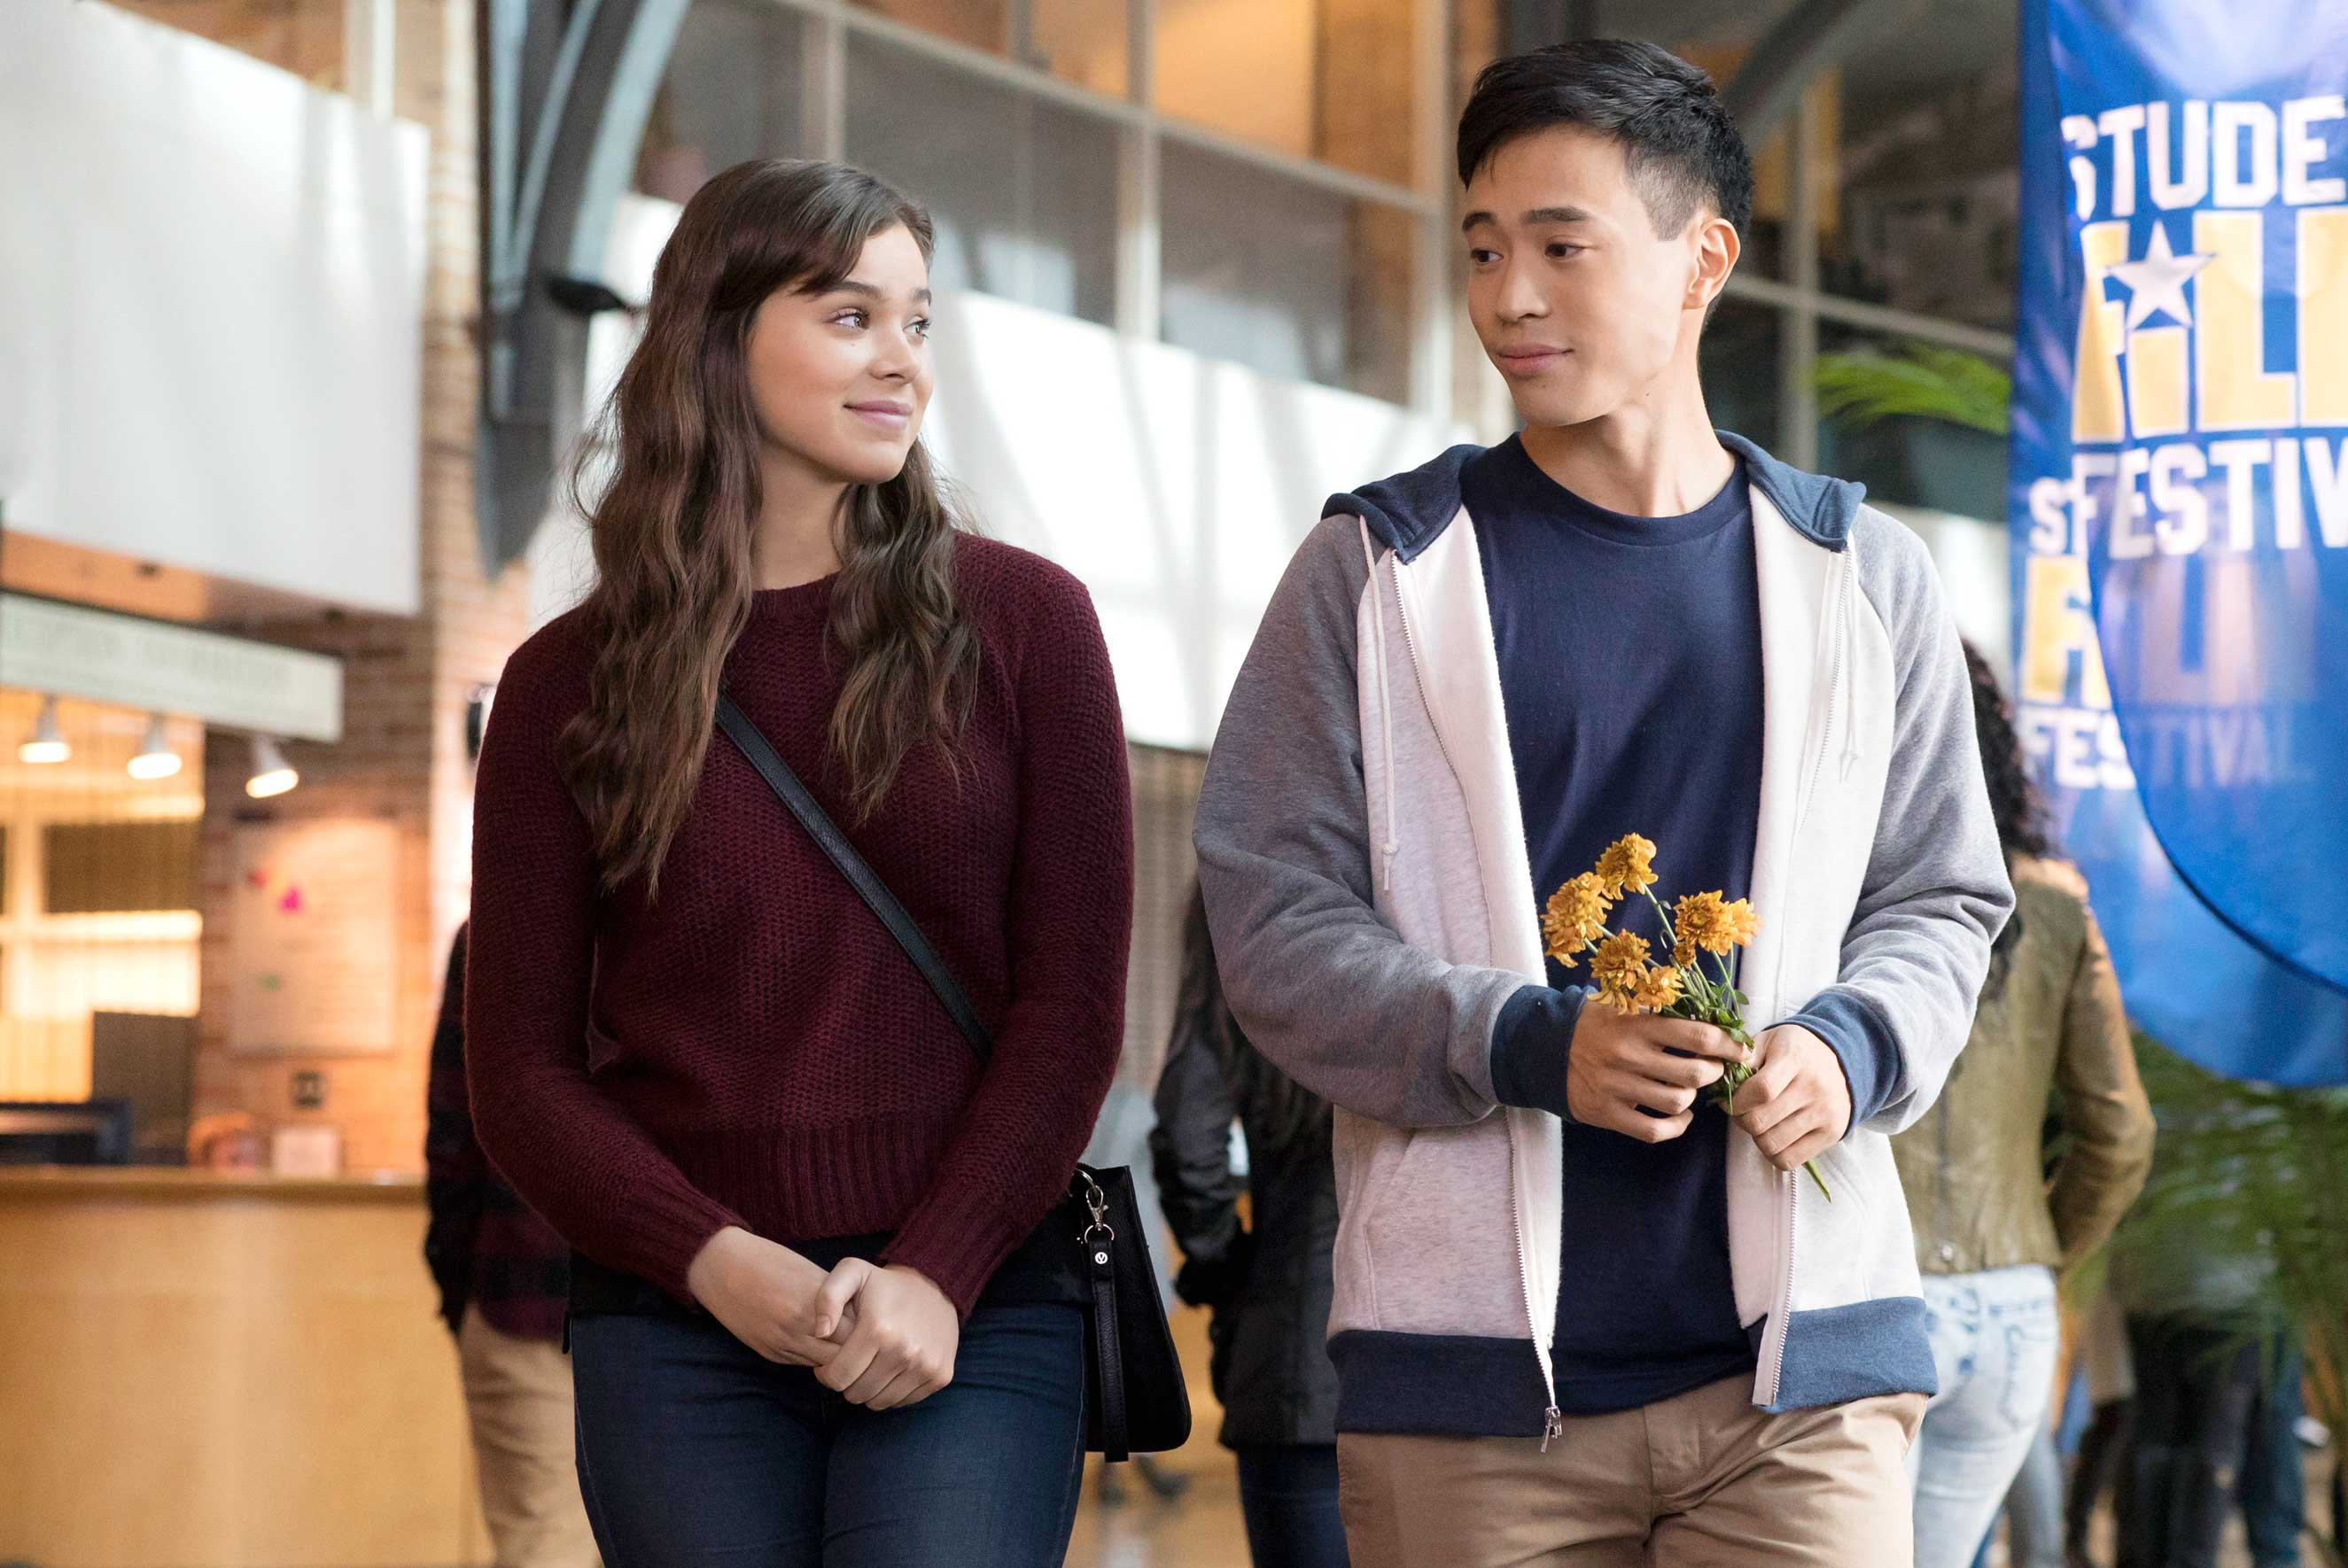 (Left to Right) Hailee Steinfeld and Hayden Szeto in The Edge of Seventeen (STX Entertainment)